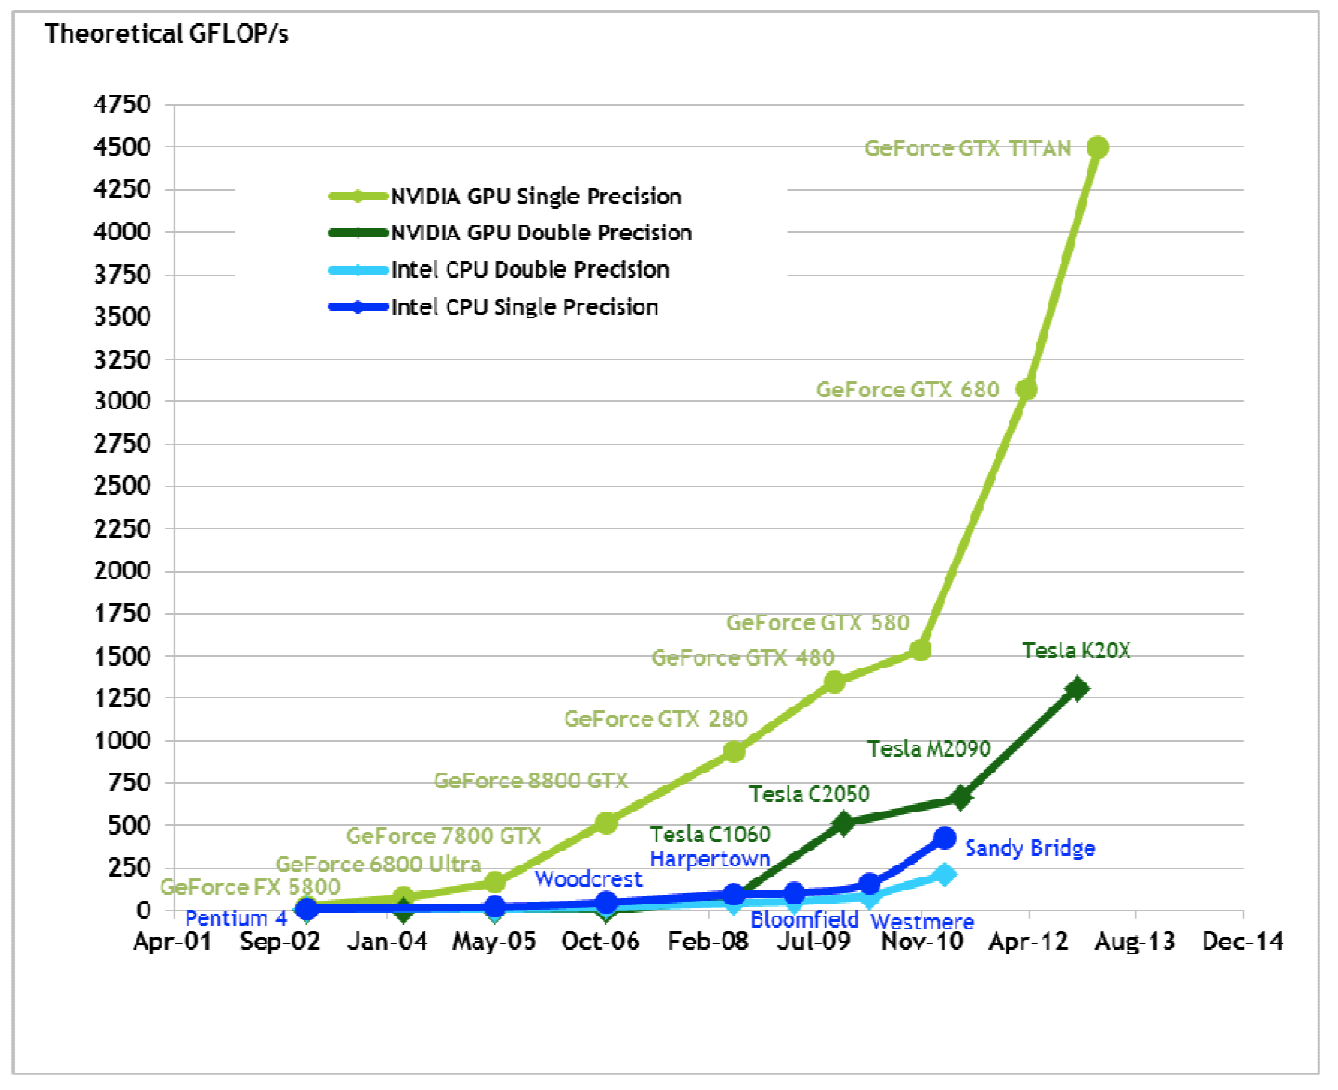 Figure 1: Graph showing the number of theoretical Floating-Point Operations per Second for CPUs
and GPUs, clearly showing the enhanced computing power achievable using GPUs (figure taken
from NVIDIA’s CUDA website).